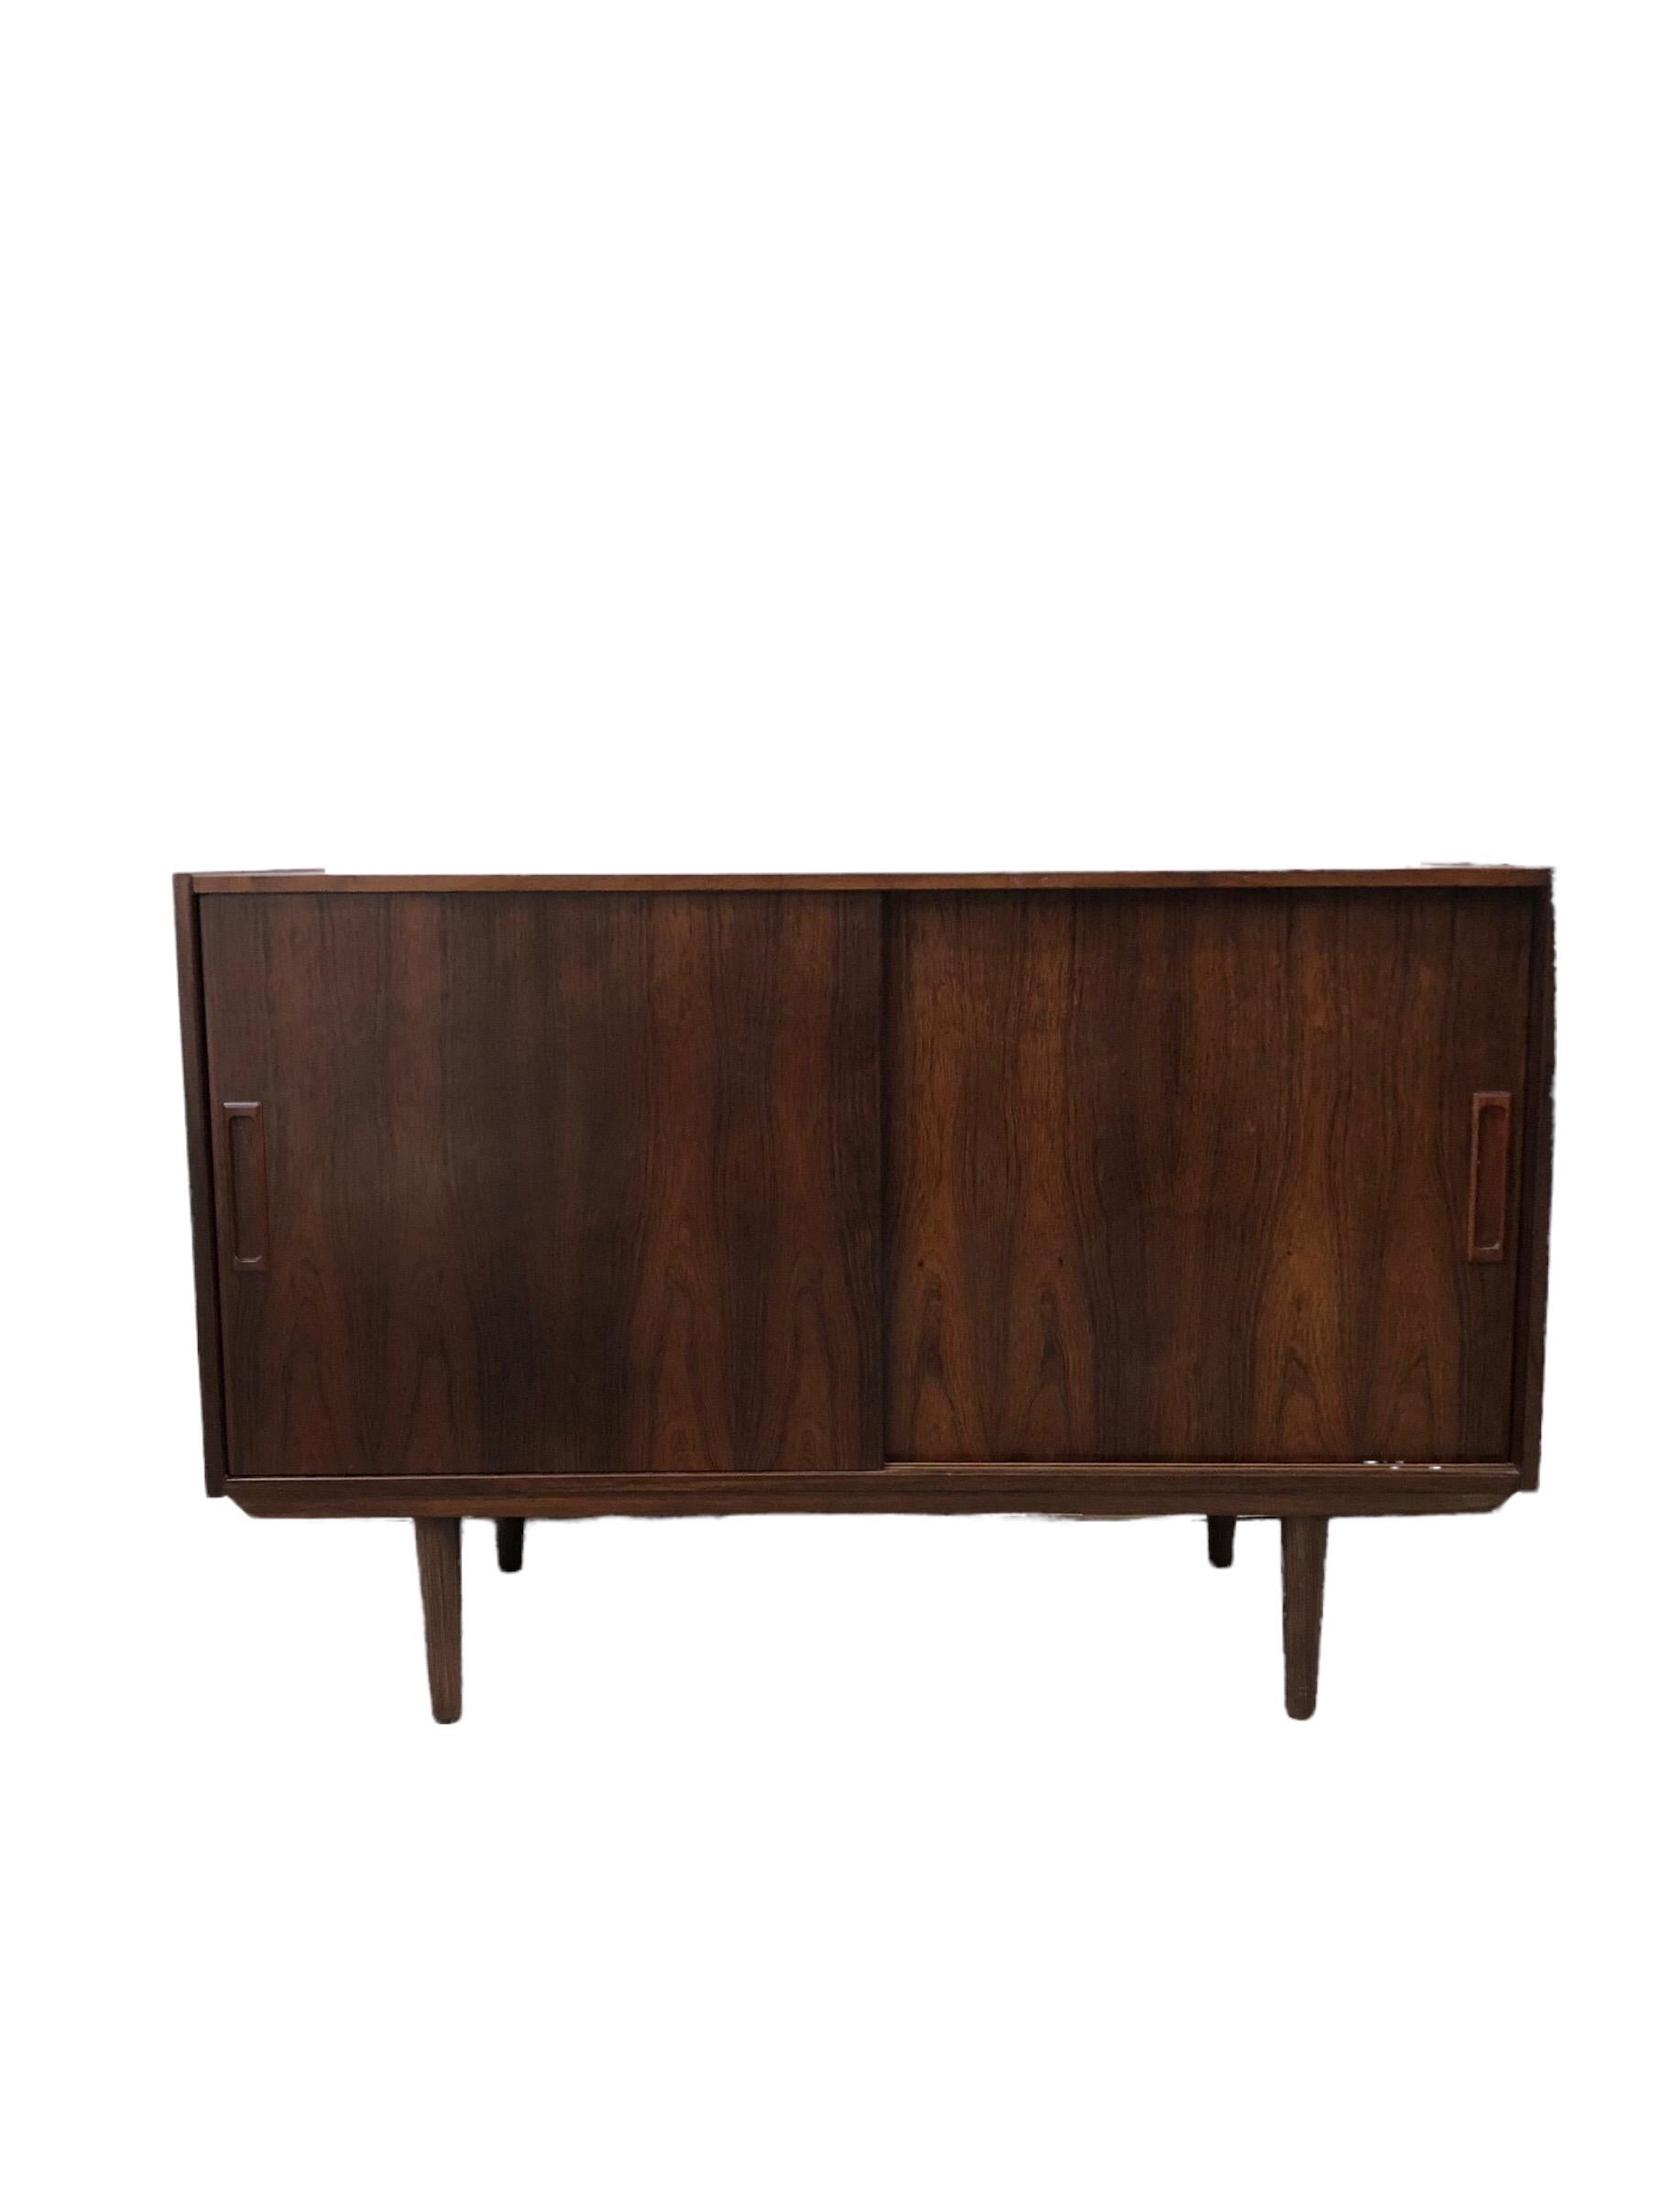 Mid-20th Century Vintage Danish Mid-Century Modern Rosewood Credenza or Record Cabinet